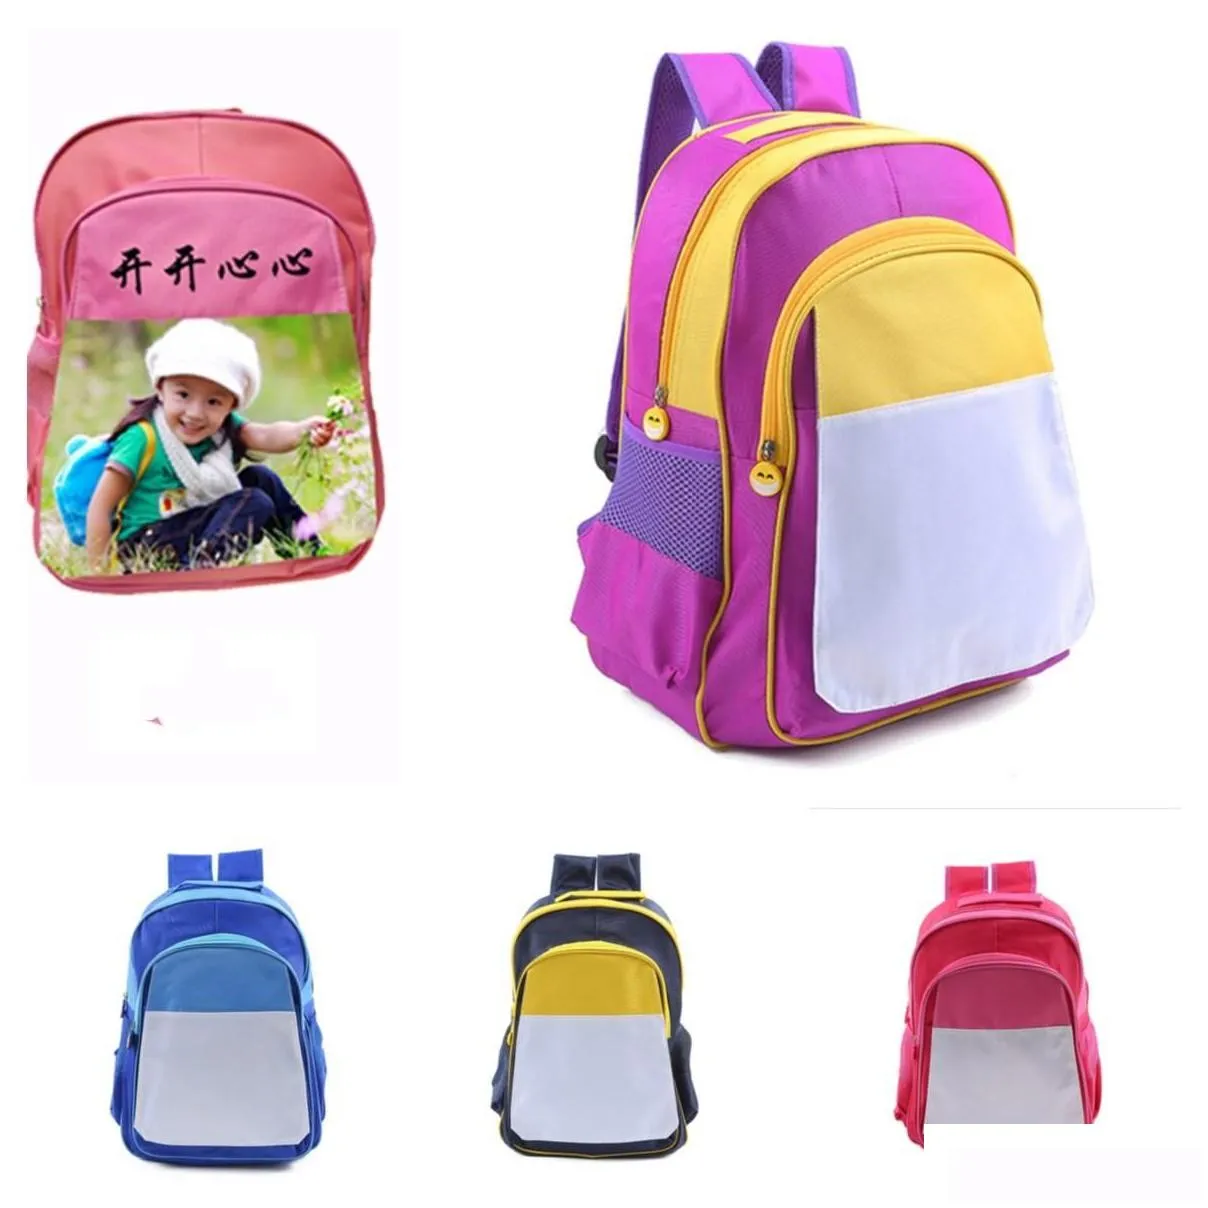 2021 DIY Thermal Transfer Backpack Kids Sublimation Blank Shoulders Bags Colorful Christmas Students Junior`s School Bag Totes Gifts